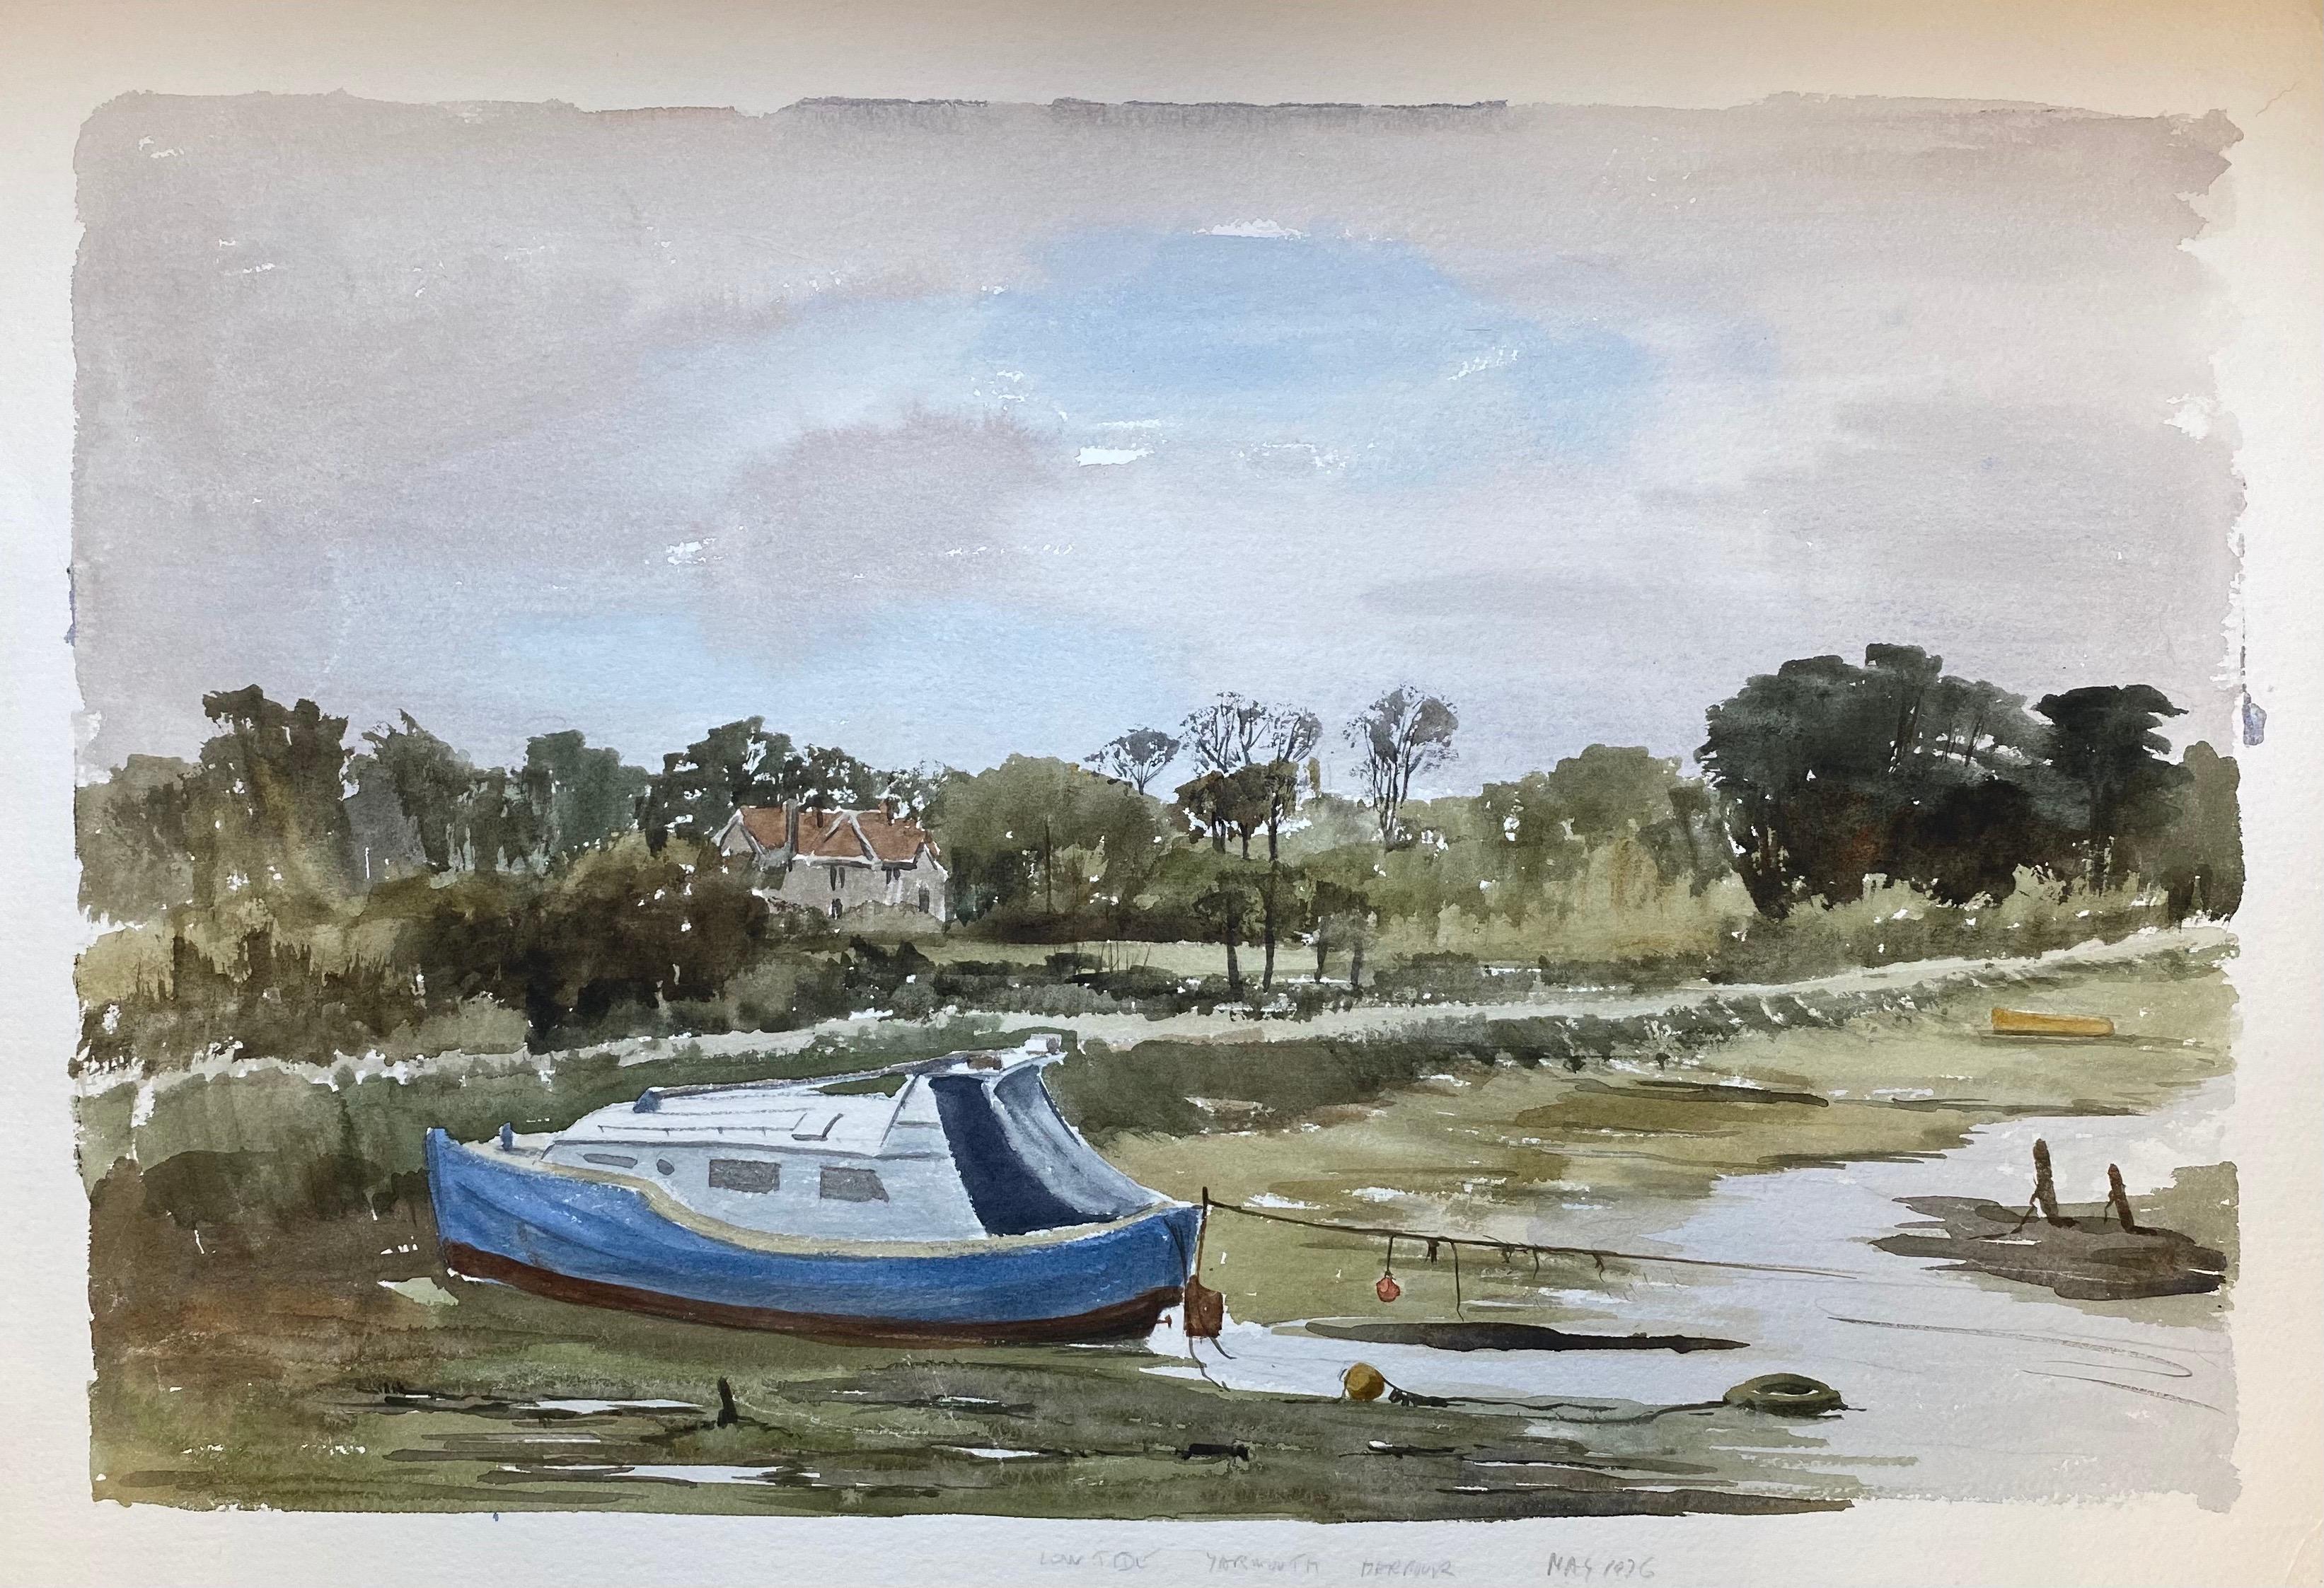 Low Tide Yarmouth Harbour - Original British Watercolour Painting